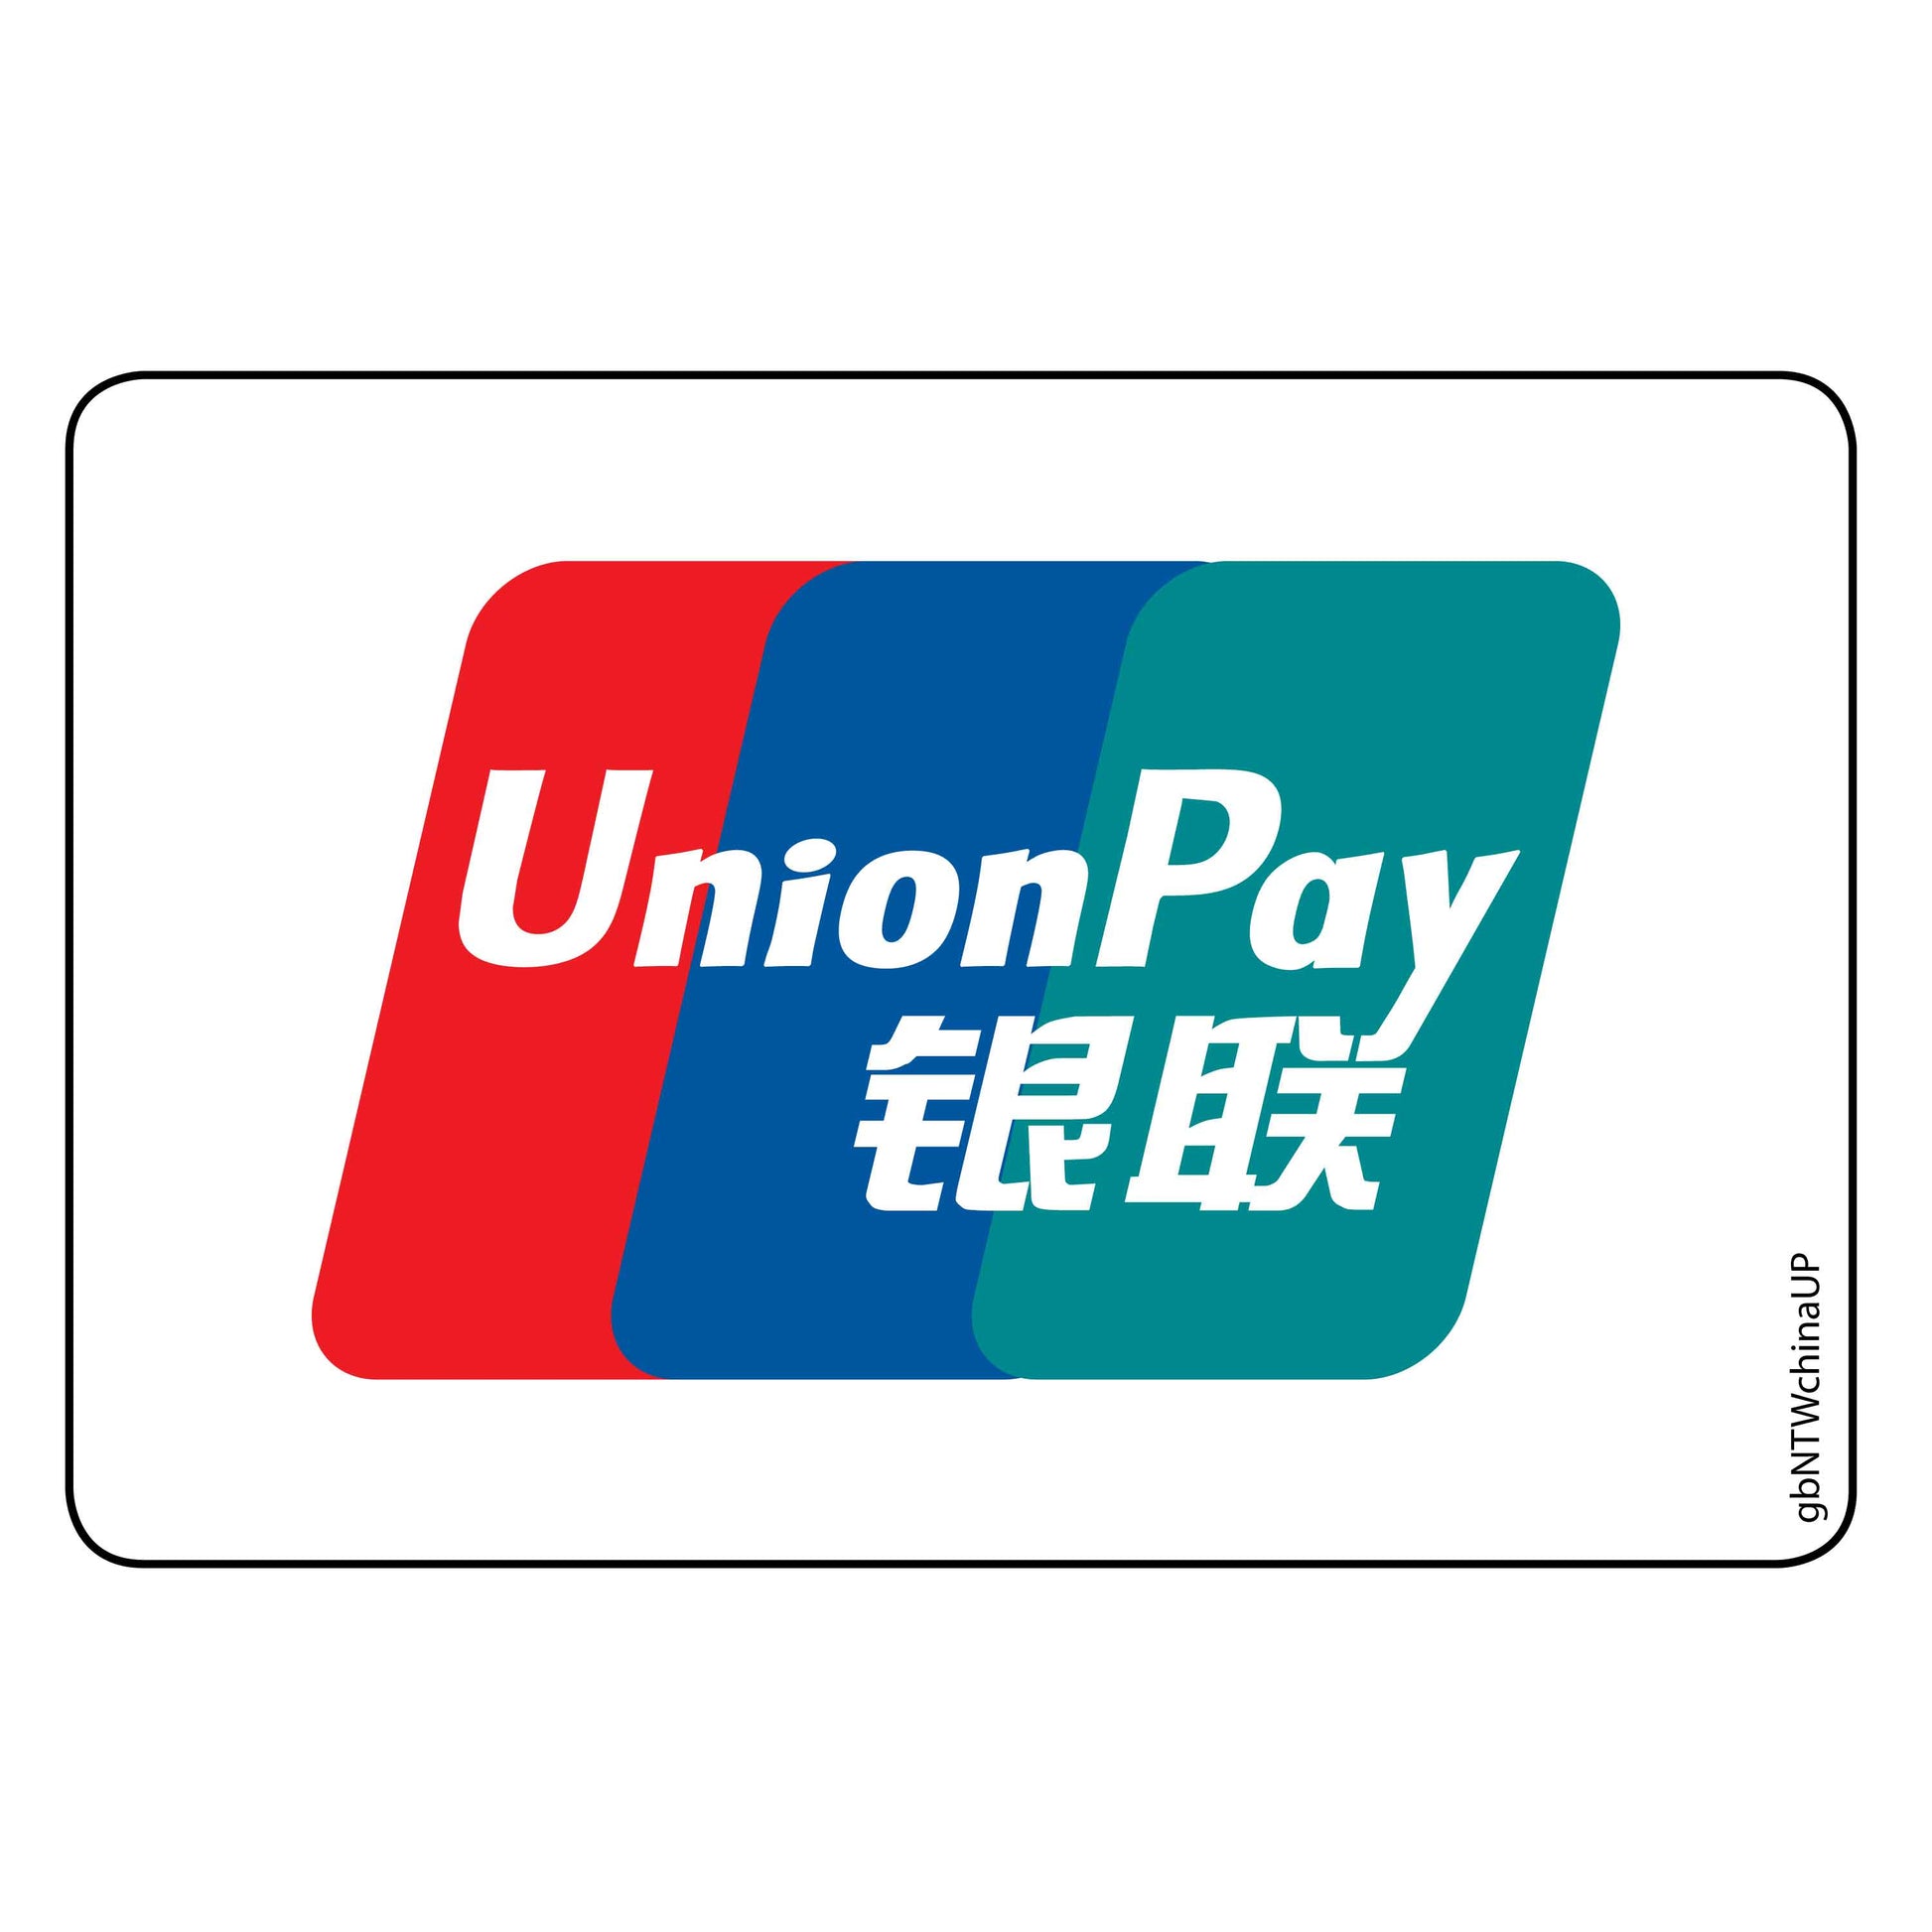 Single Network Decal, China Union Pay. 3 inches by 2 inches in size.